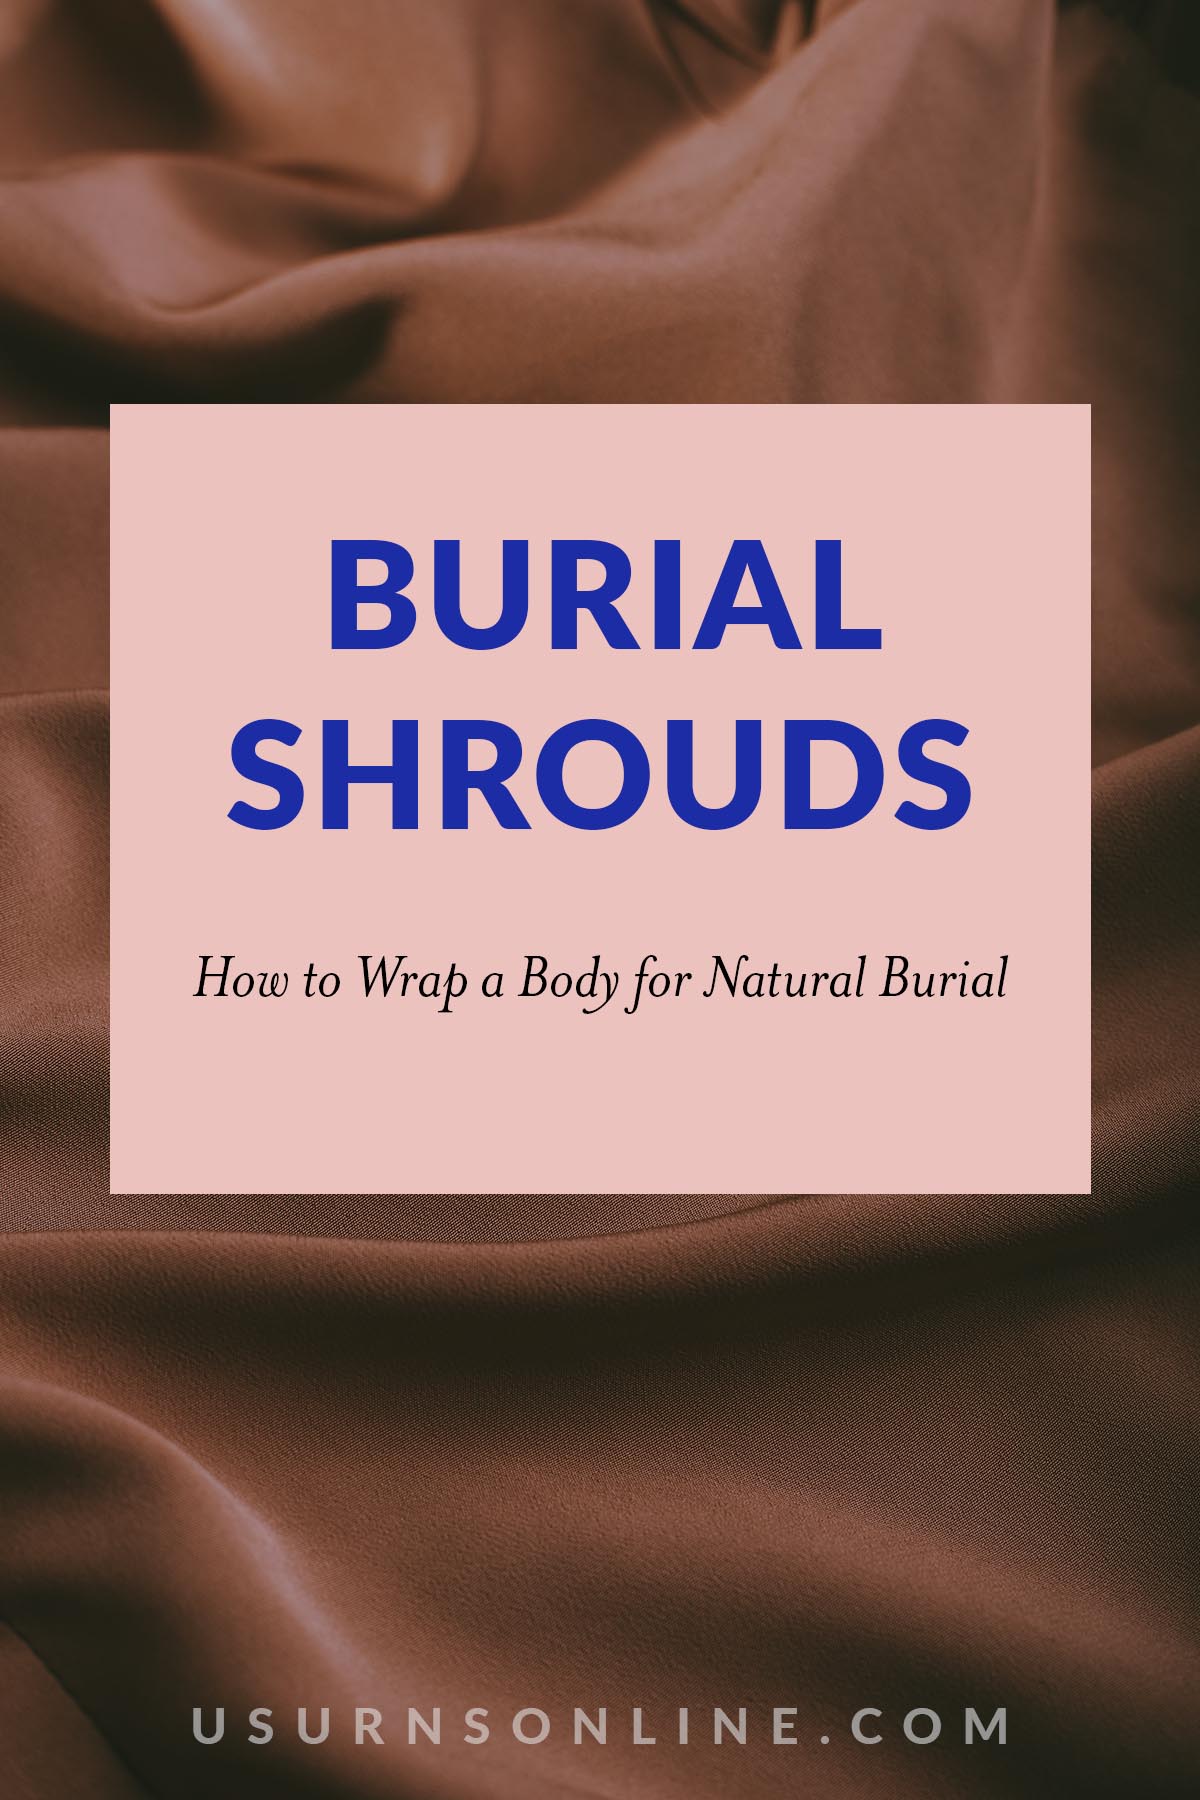 what is a burial shroud - Feat image